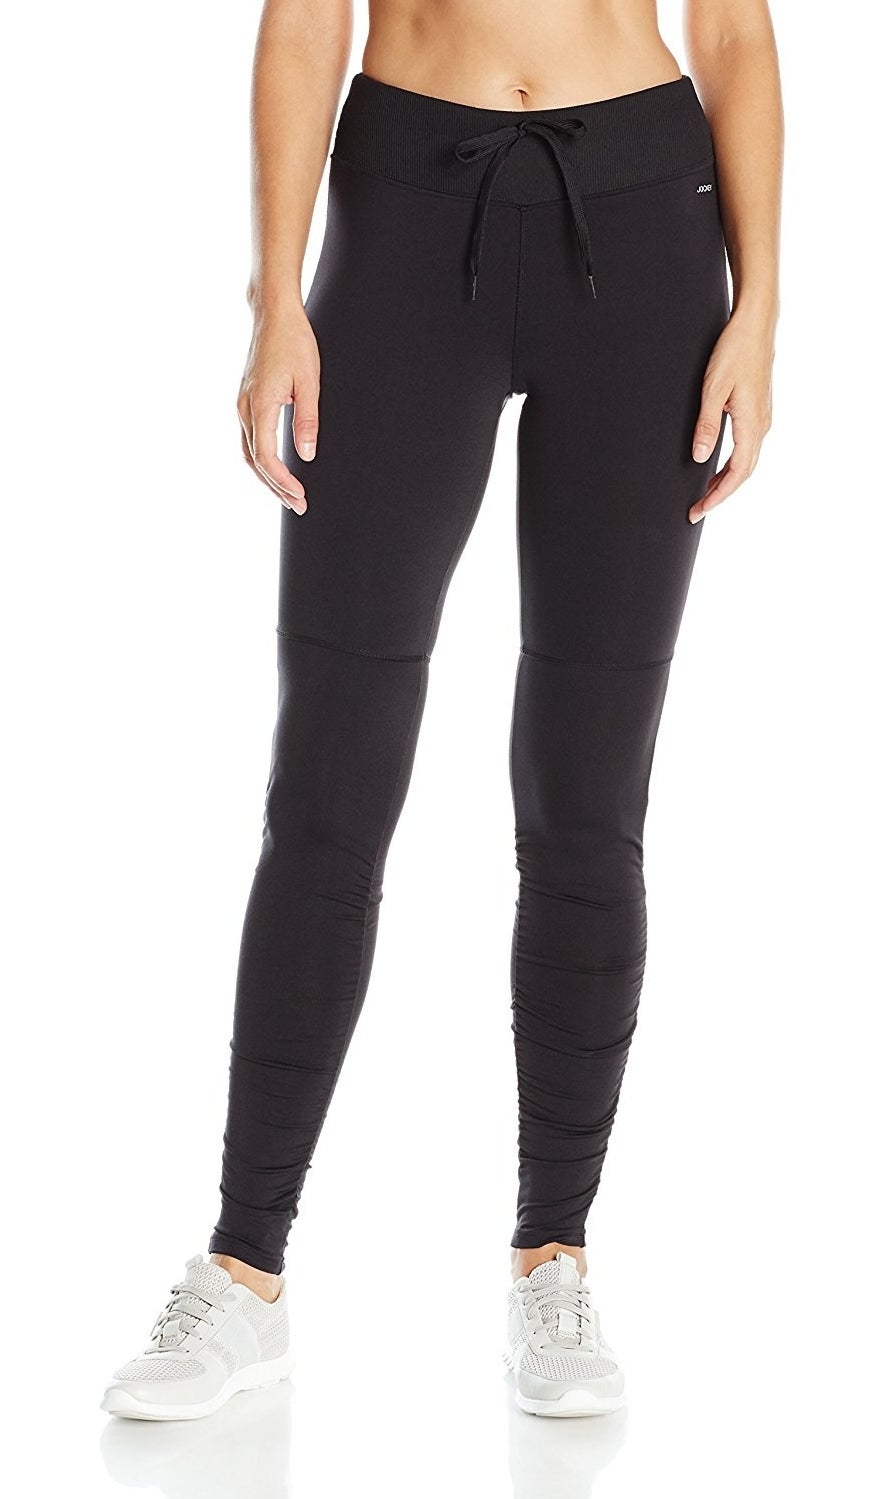 21 Of The Best Pairs Of Leggings You Can Get On Amazon